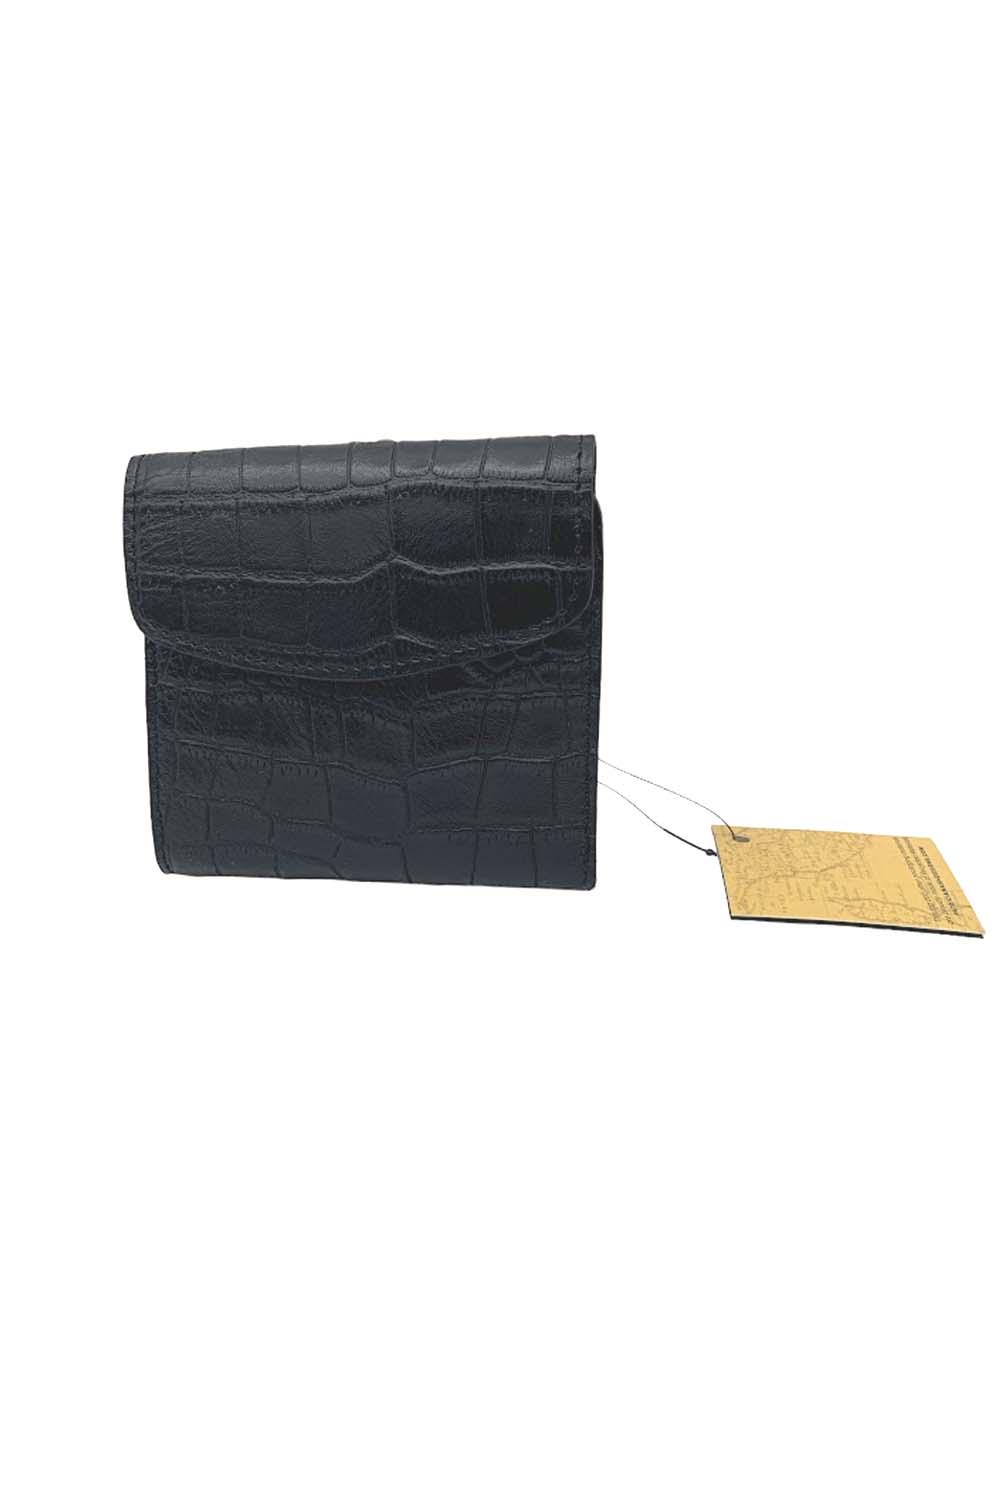 Patricia Nash Leather Beverley Wallet